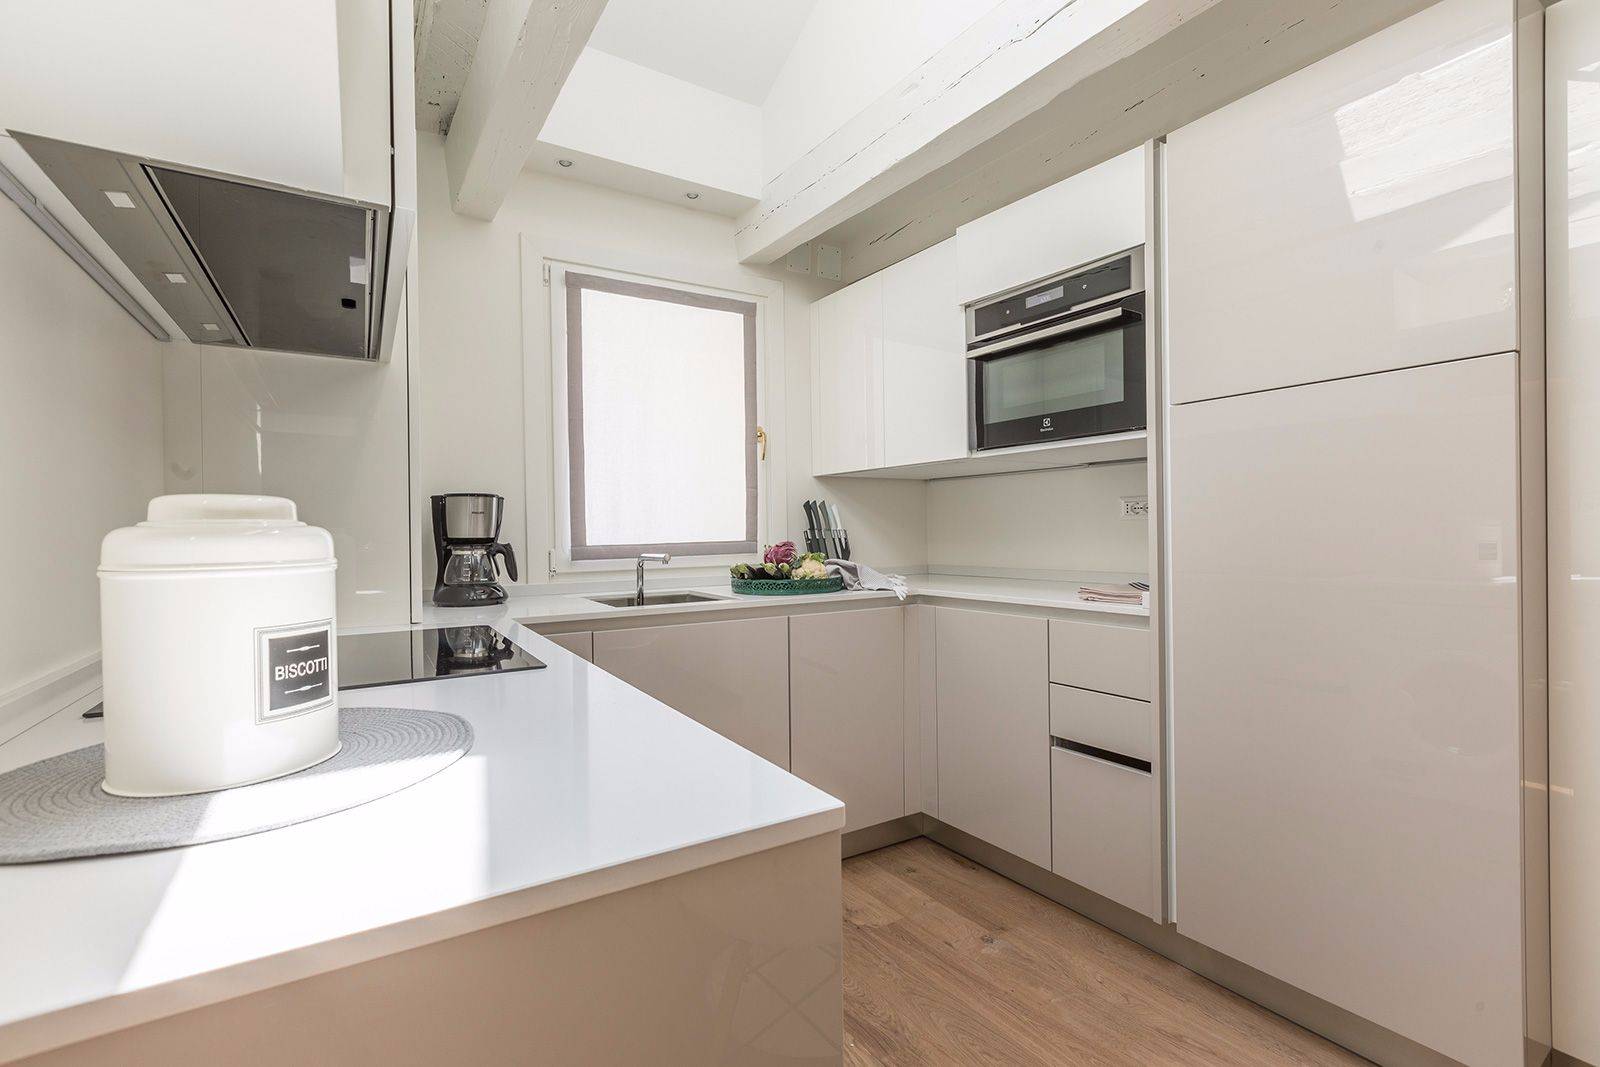 the kitchen is bright and spacious and it is fully equipped